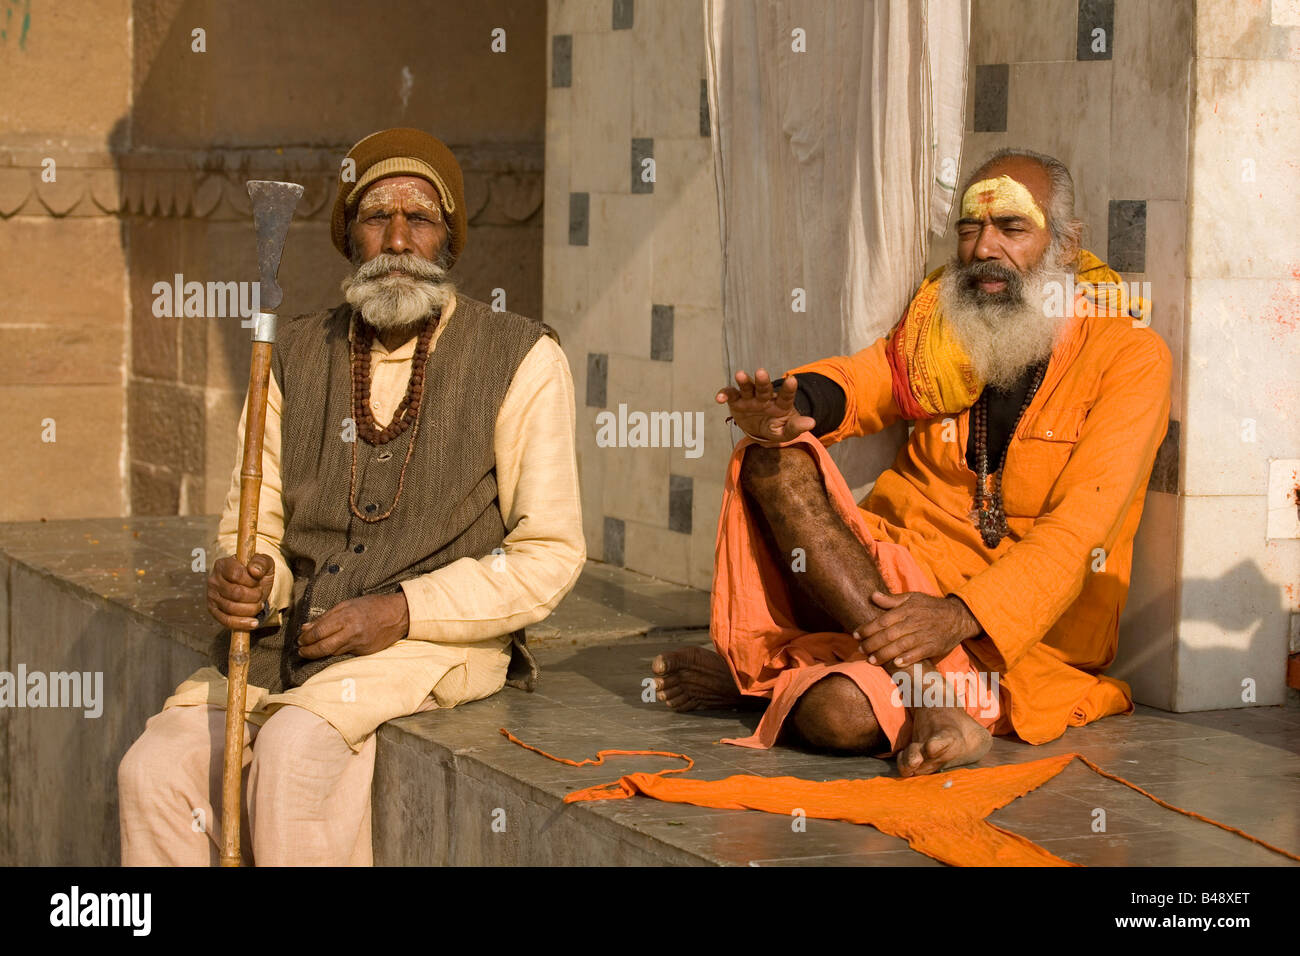 A bearded sadhu sits in contemplation by a temple in the city of Varanasi, India. A man with a staff sits next to him. Stock Photo